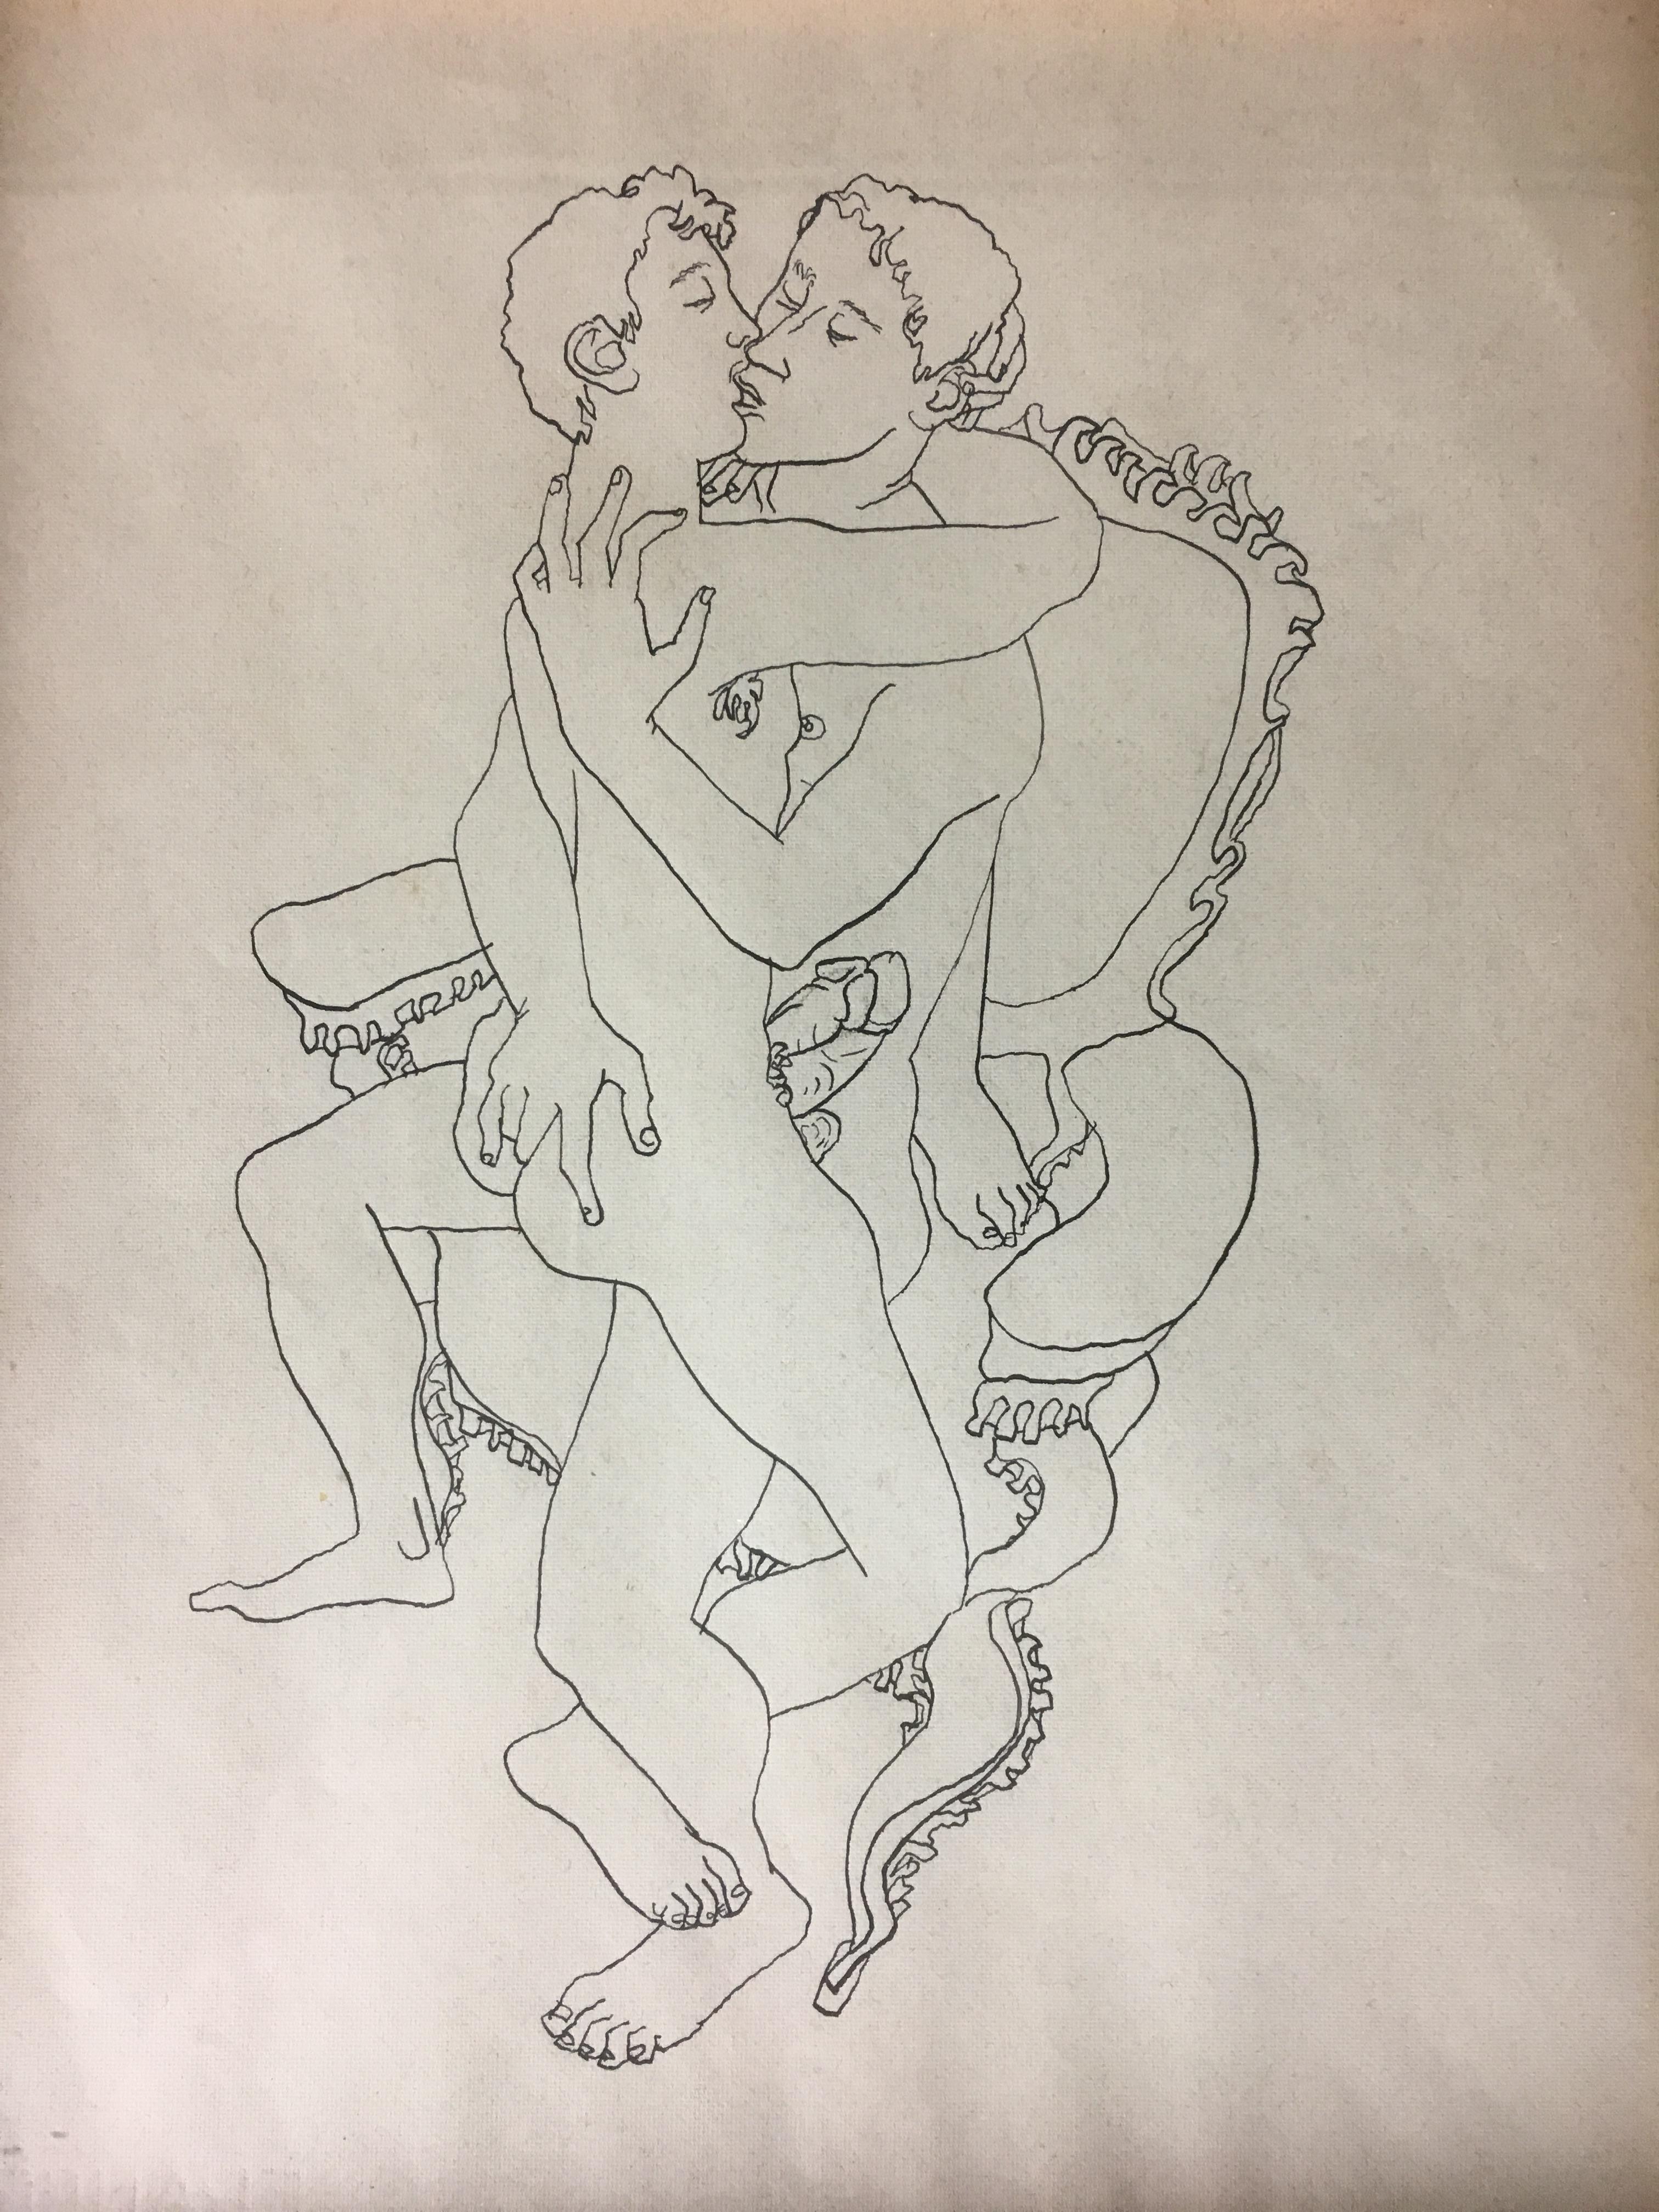 Erotic Art, ink drawing.
Attributed to listed French artist, Jean Boullet. 
Unsigned. 

Provenance: auction - estate of very close friend of African American Writer James Baldwin. 
Dimensions: 11 5/8